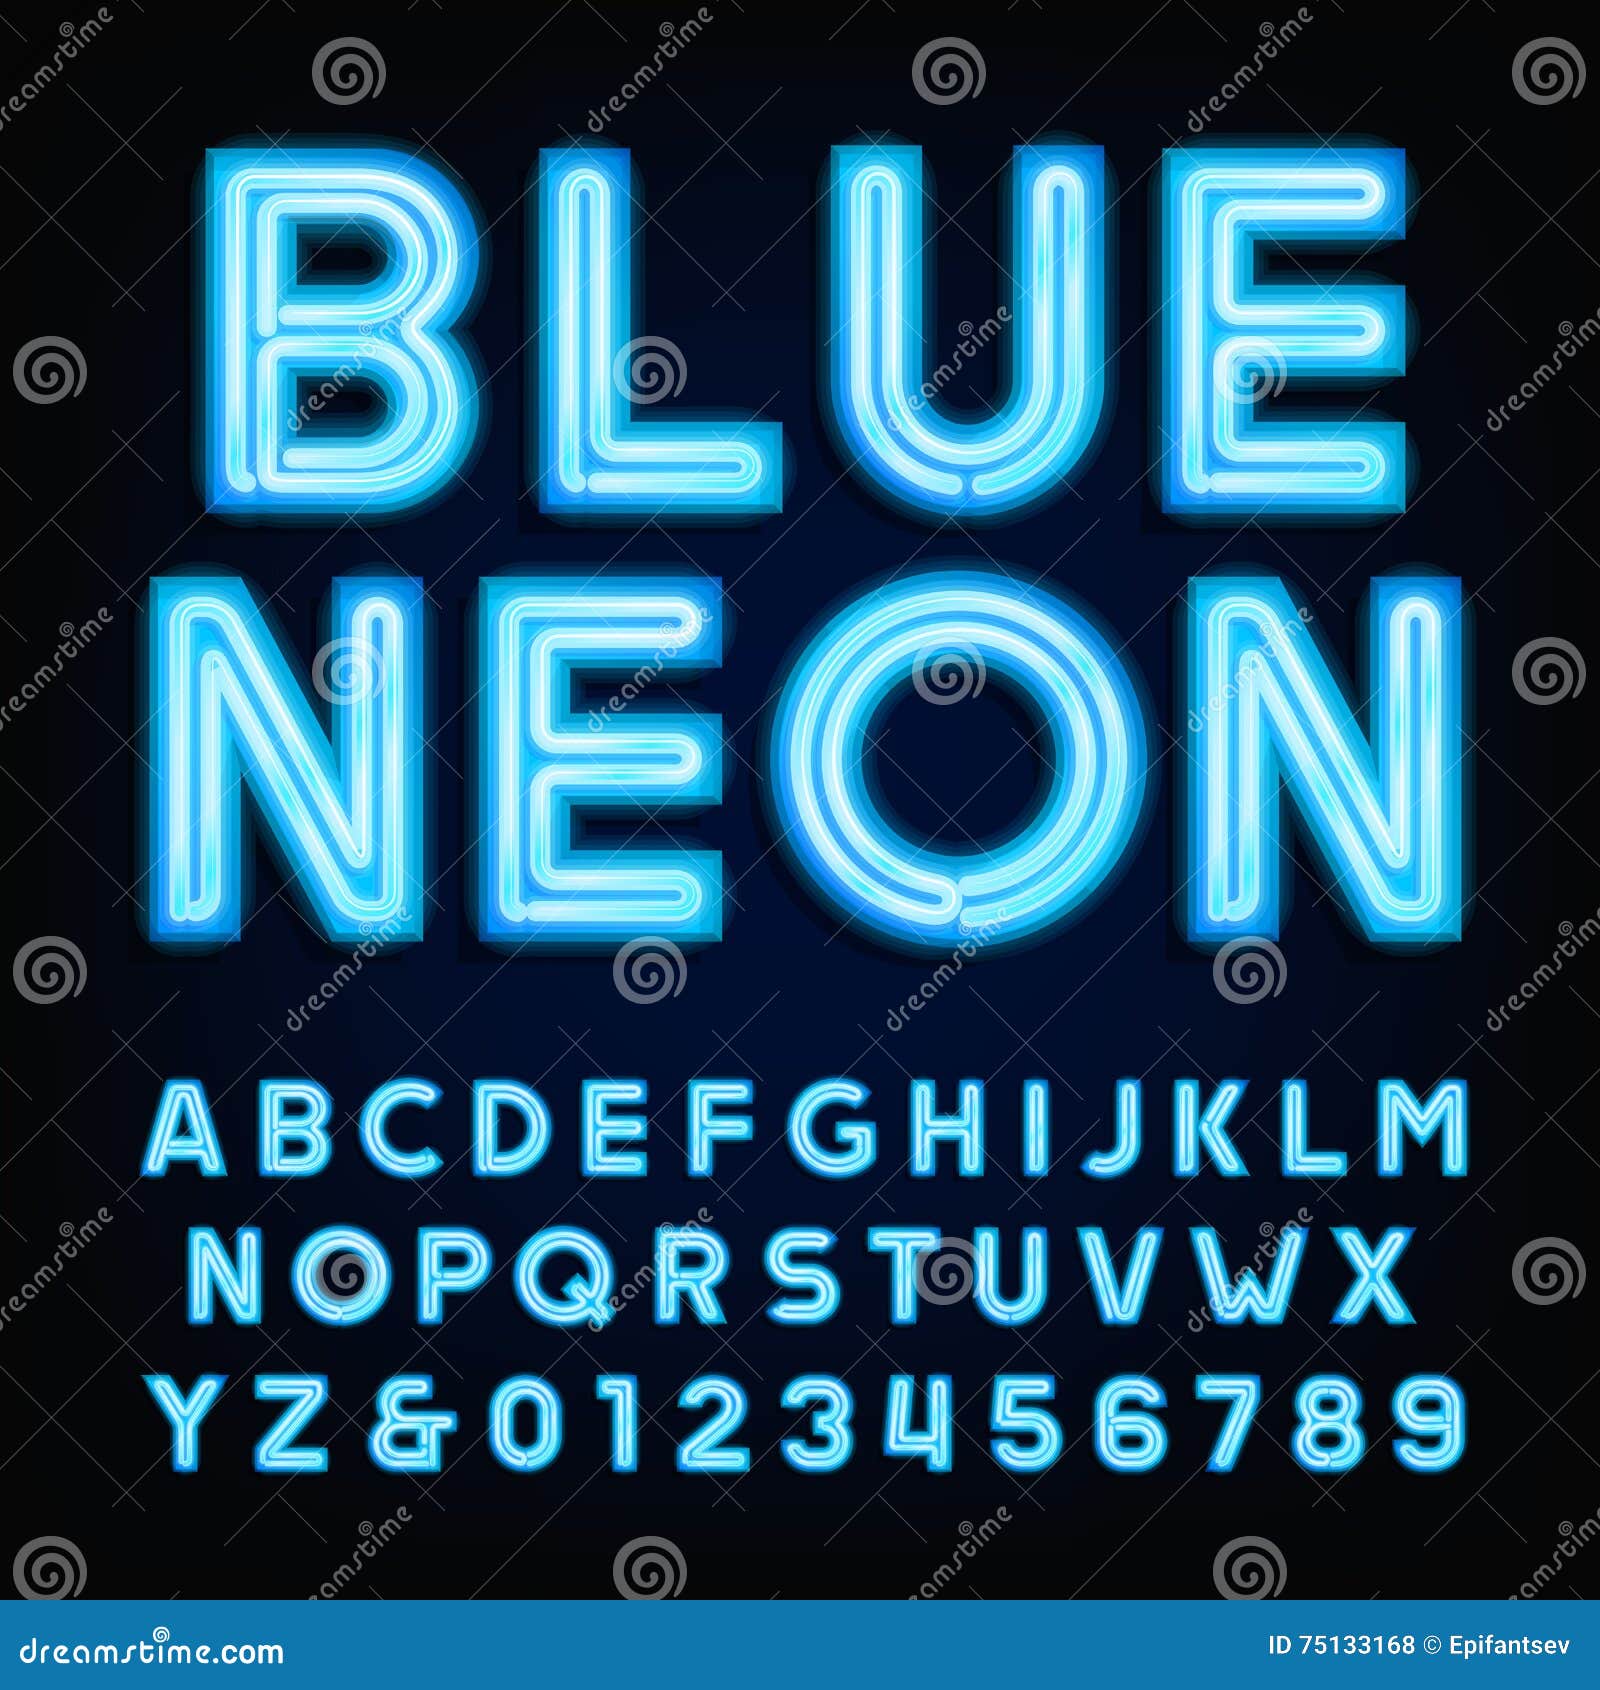 Blue Neon Tube Alphabet Font. Type Letters and Numbers on a Dark ...